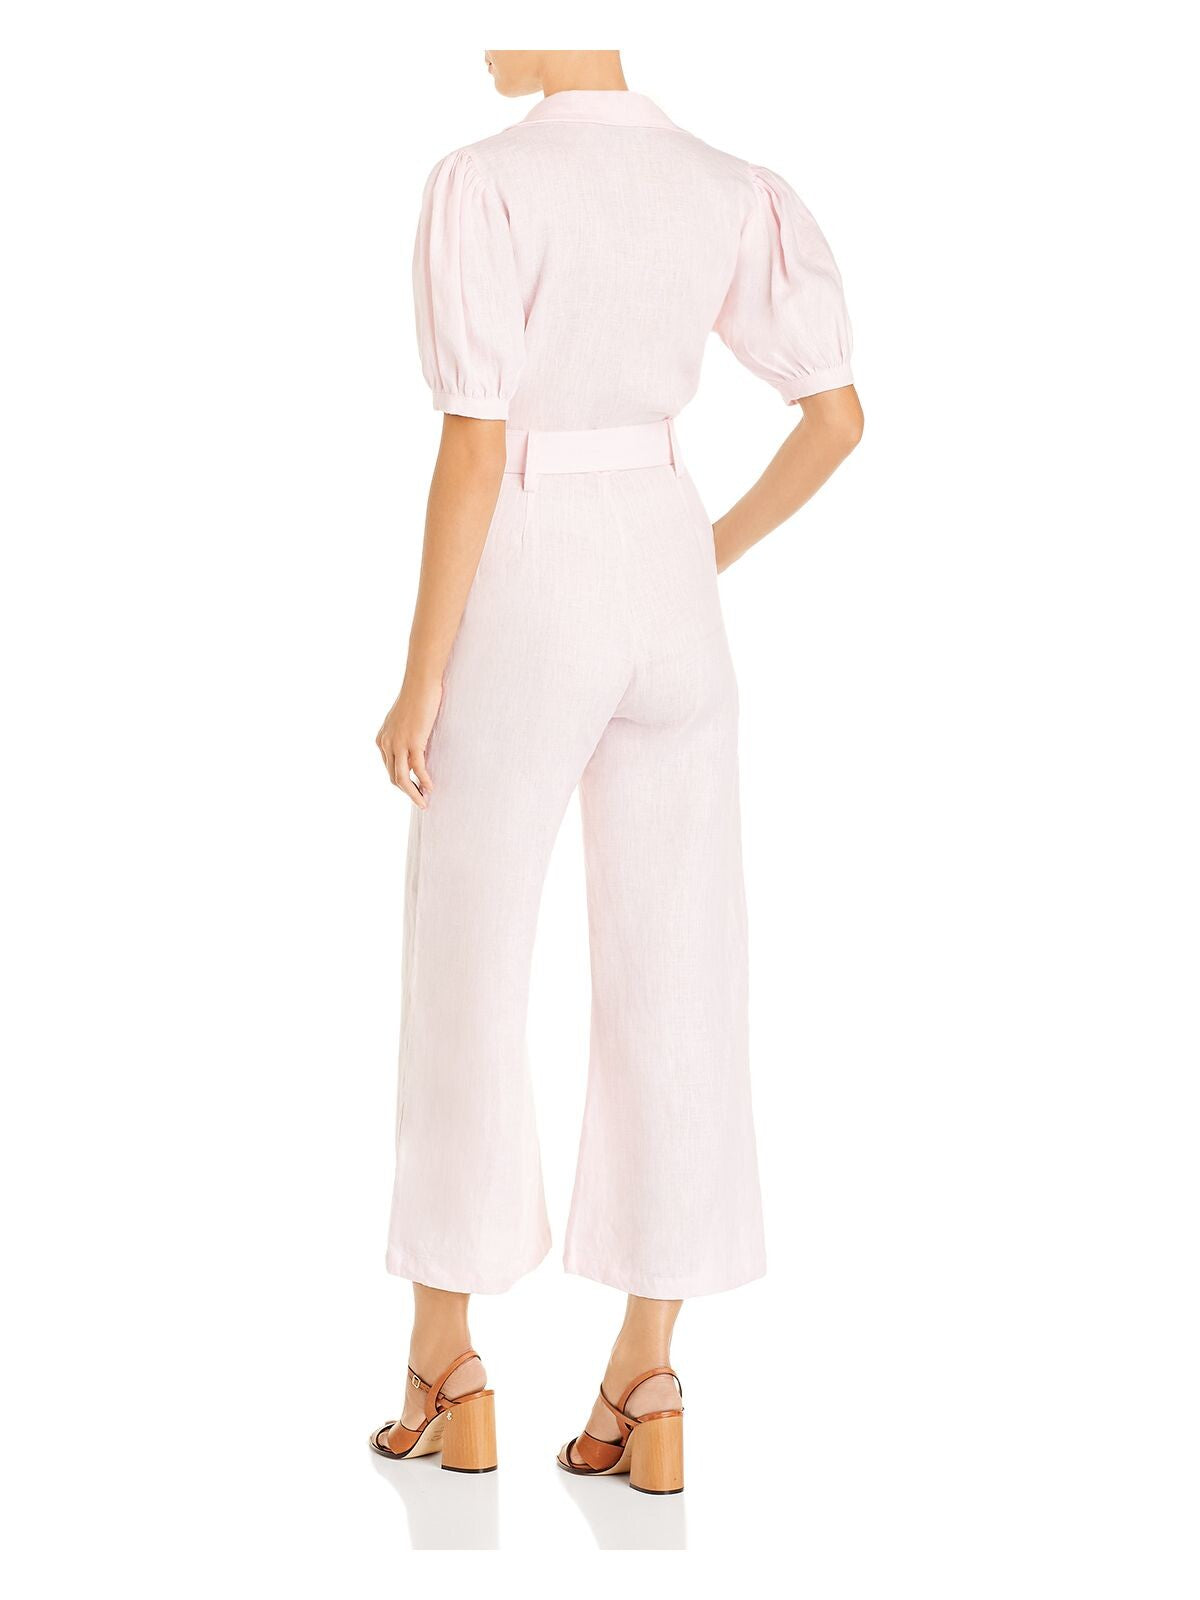 FAITHFULL THE BRAND Womens Pink Belted Pleated Button Front Short Sleeve Collared Jumpsuit L